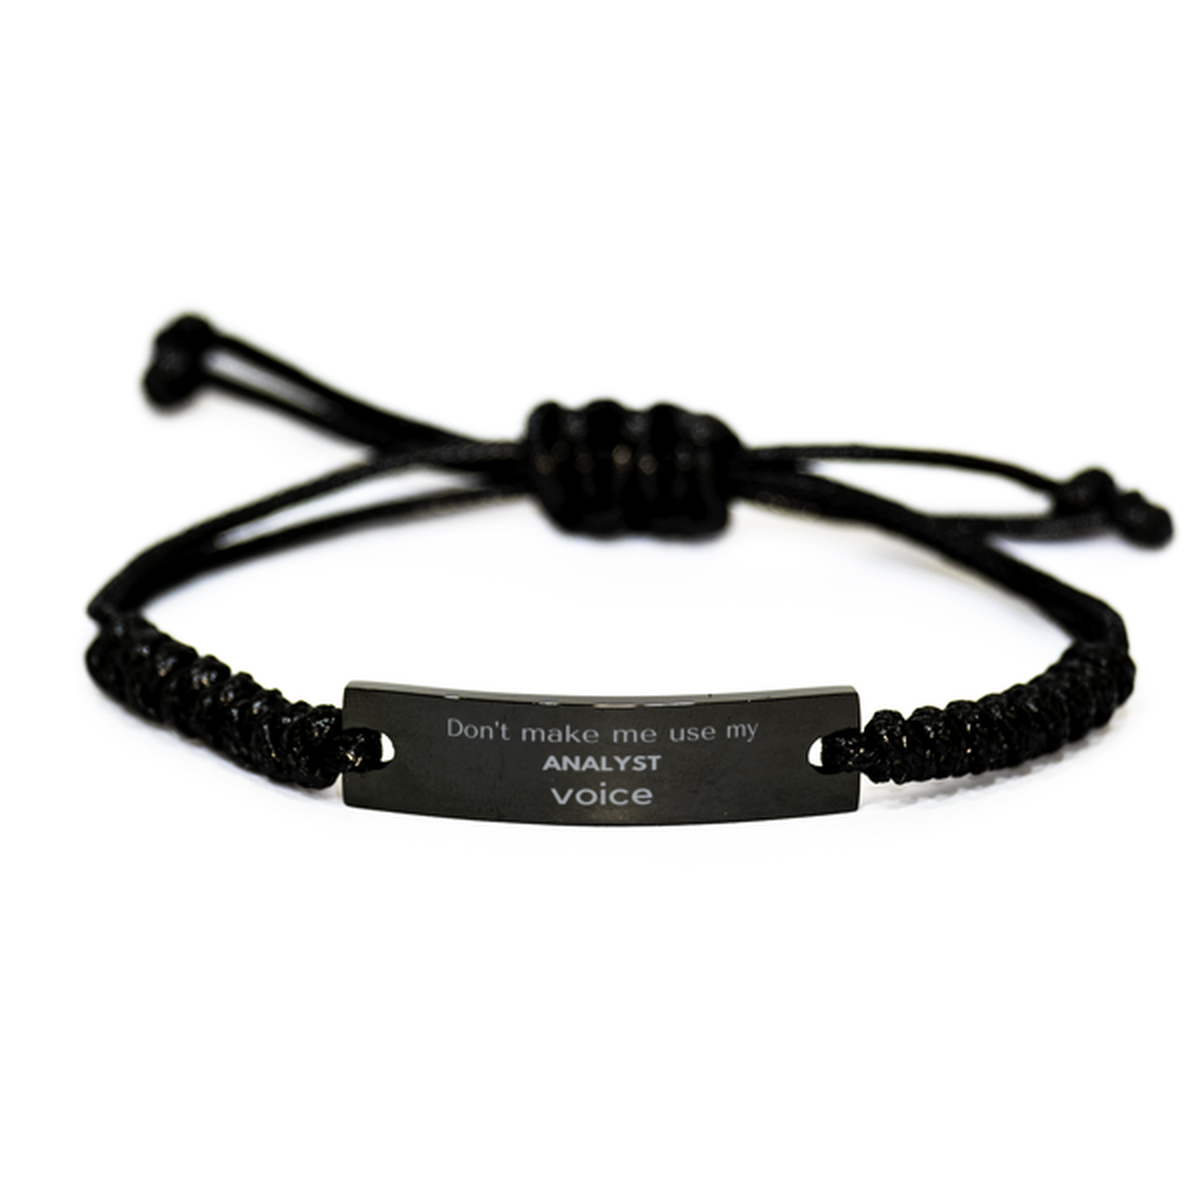 Don't make me use my Analyst voice, Sarcasm Analyst Gifts, Christmas Analyst Black Rope Bracelet Birthday Unique Gifts For Analyst Coworkers, Men, Women, Colleague, Friends